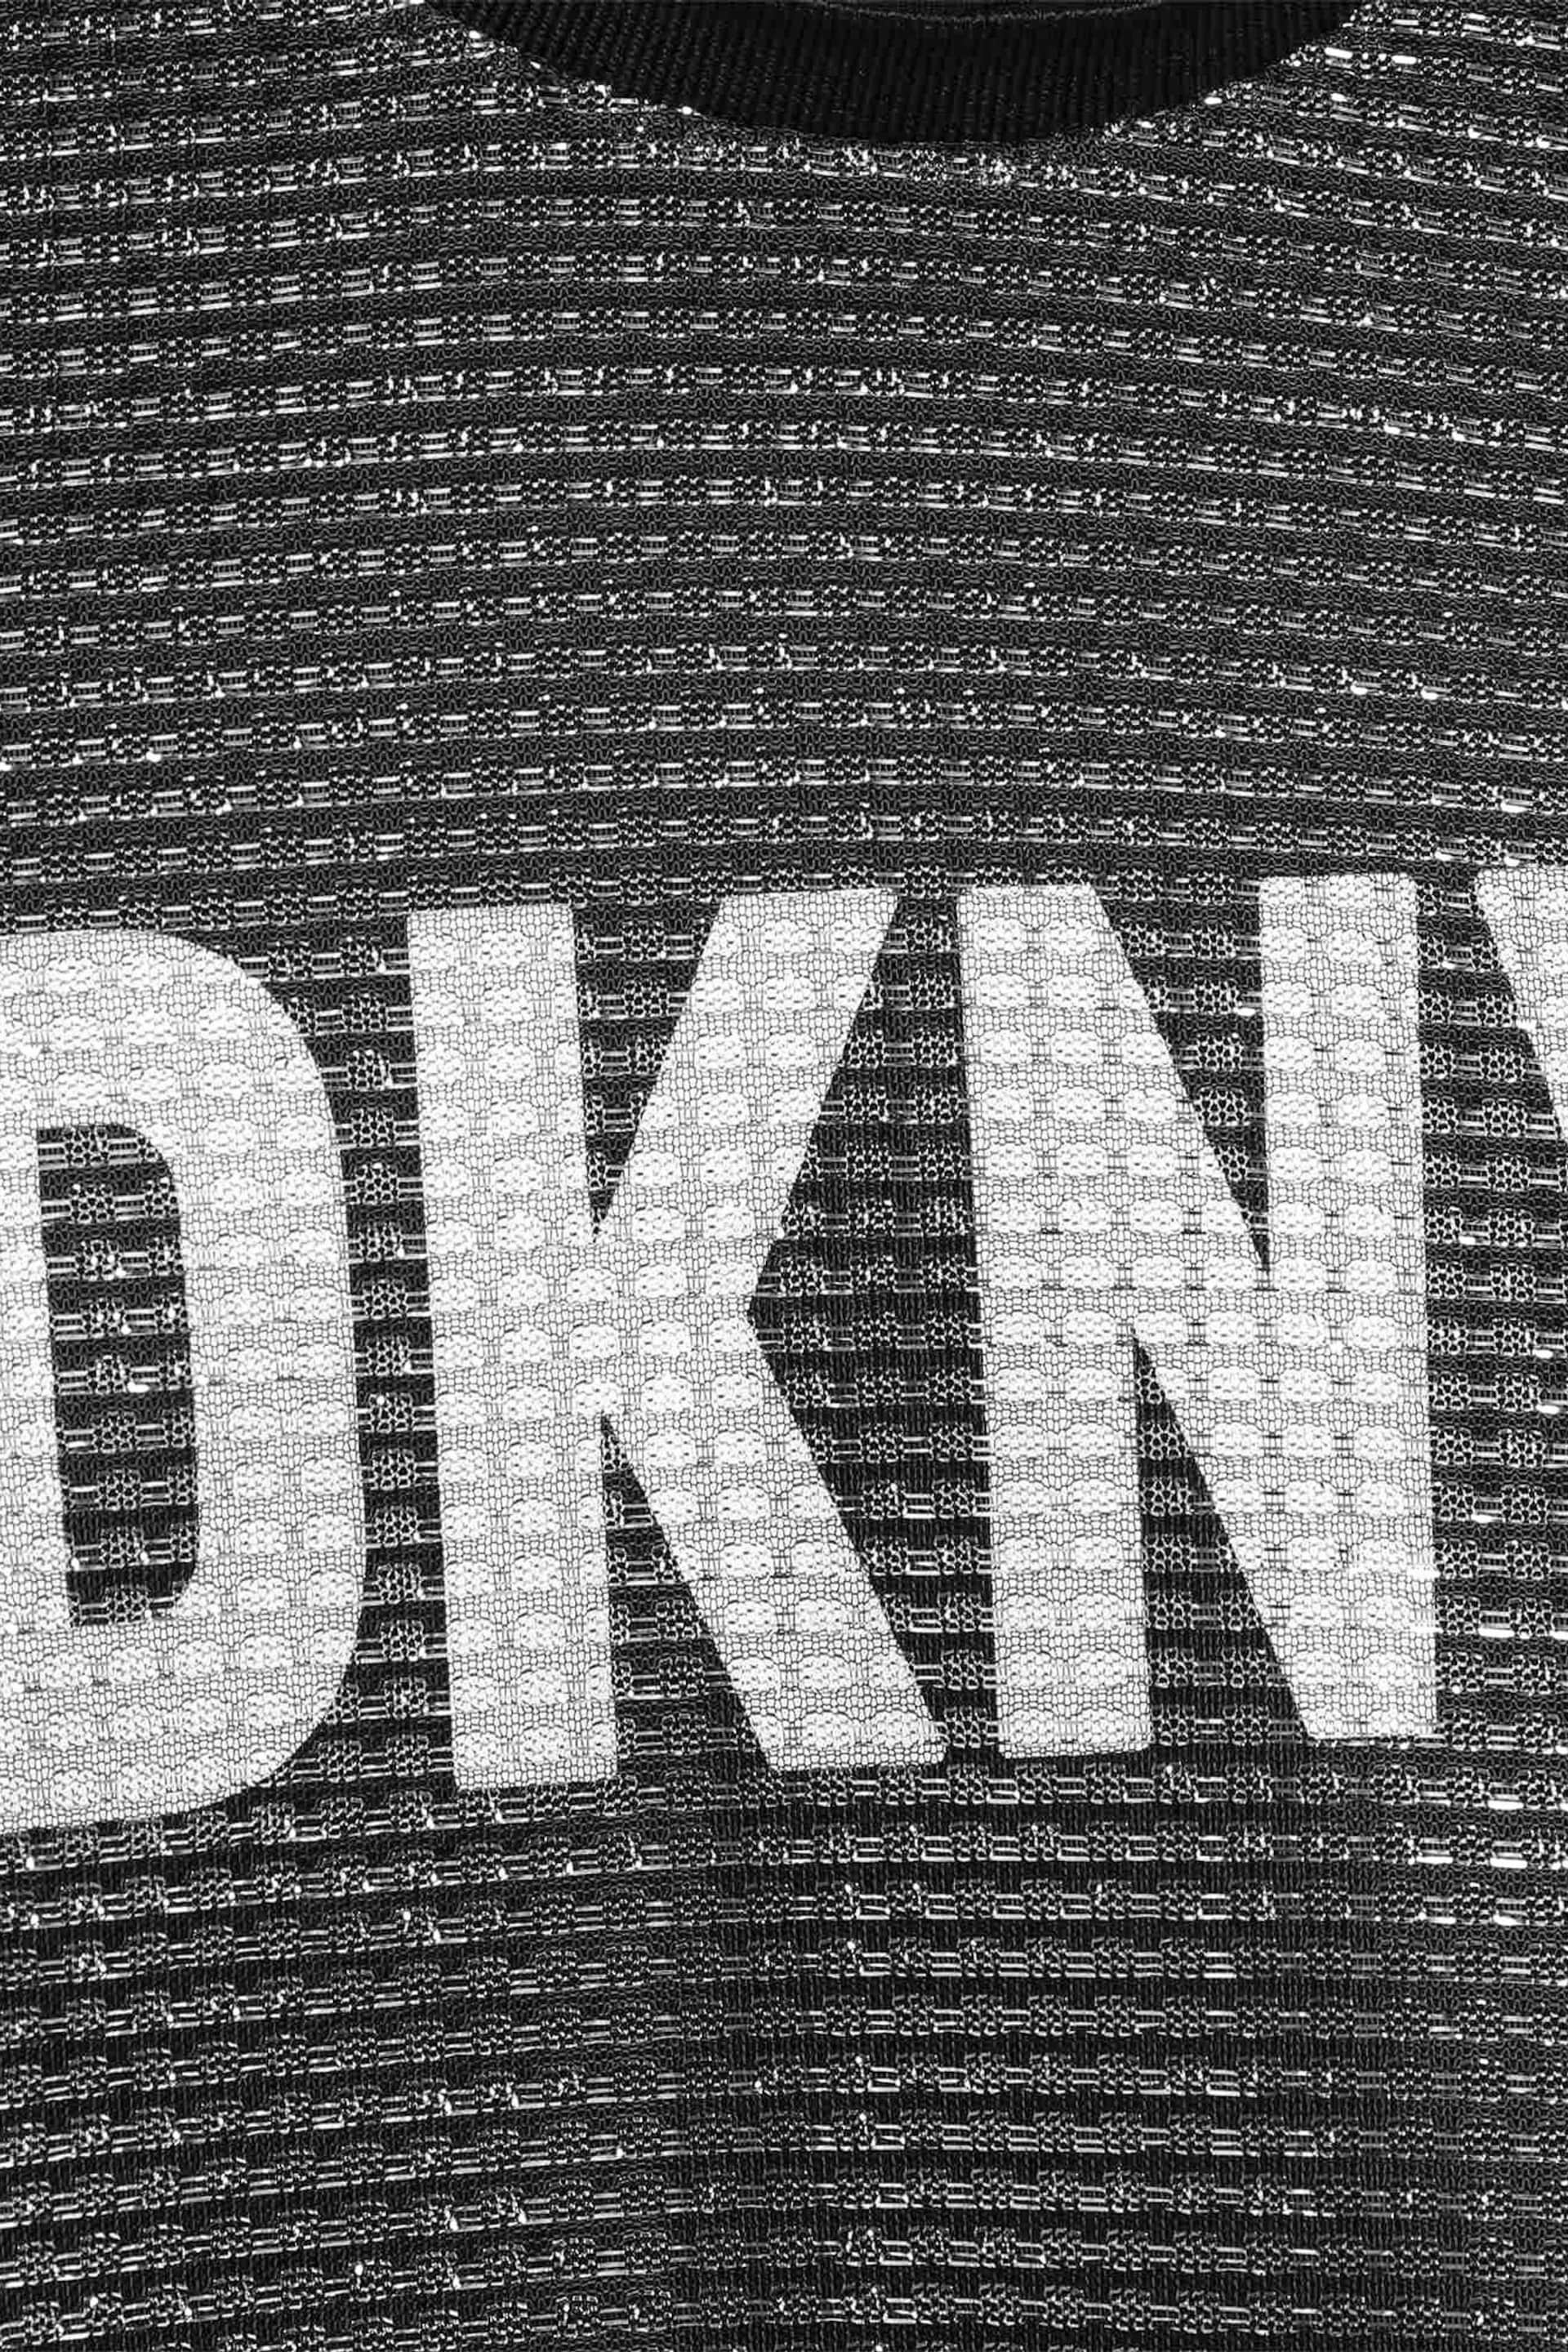 DKNY Silver 2-In-1 Layered Logo Dress - Image 4 of 4